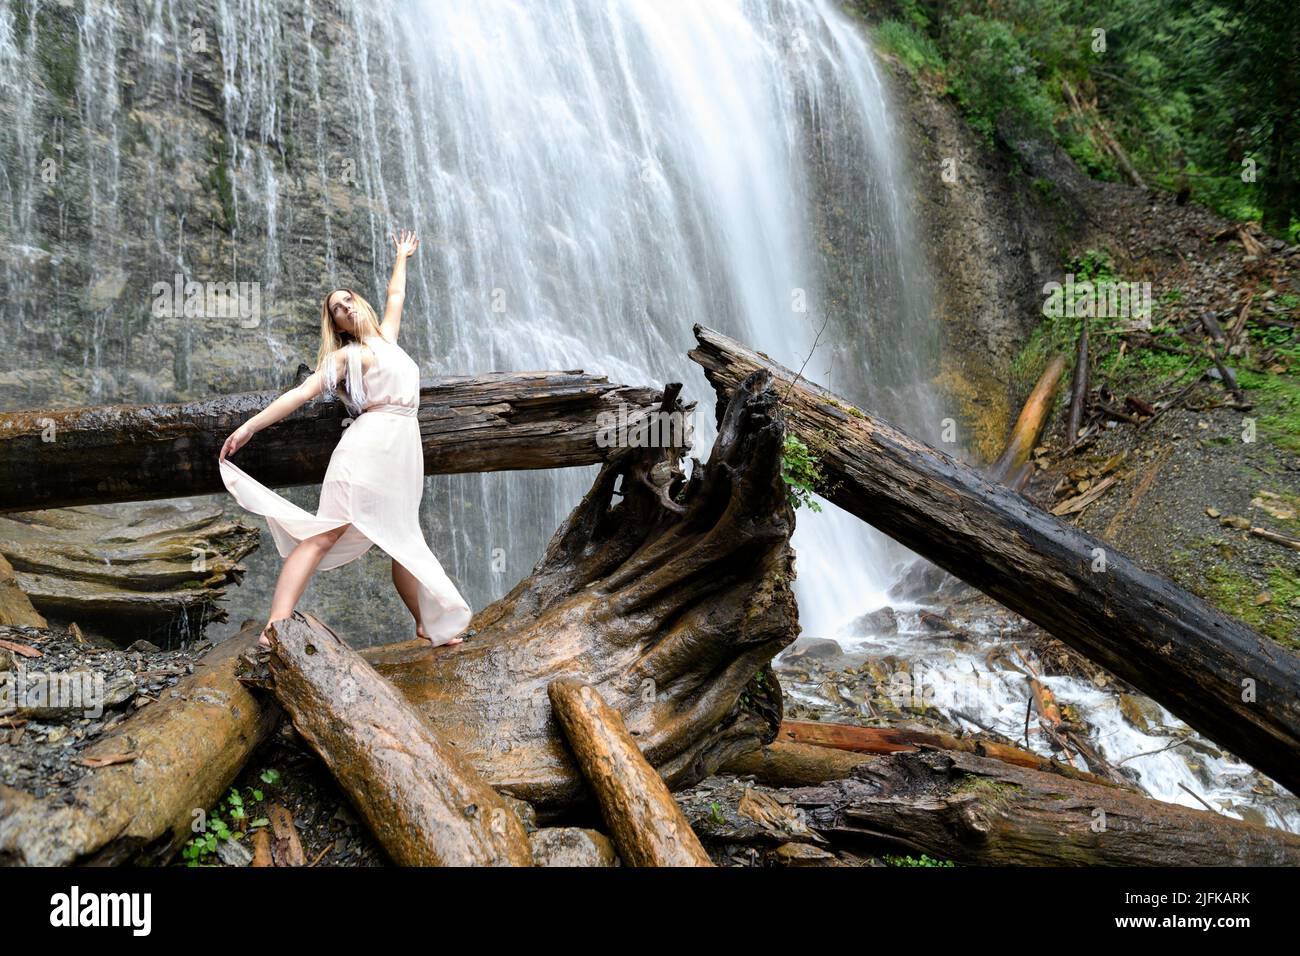 Young woman in pink dress stands barefoot on log, her arms are raised and doing some dreamlike movement and expressing happy feeling at the Bridal Stock Photo